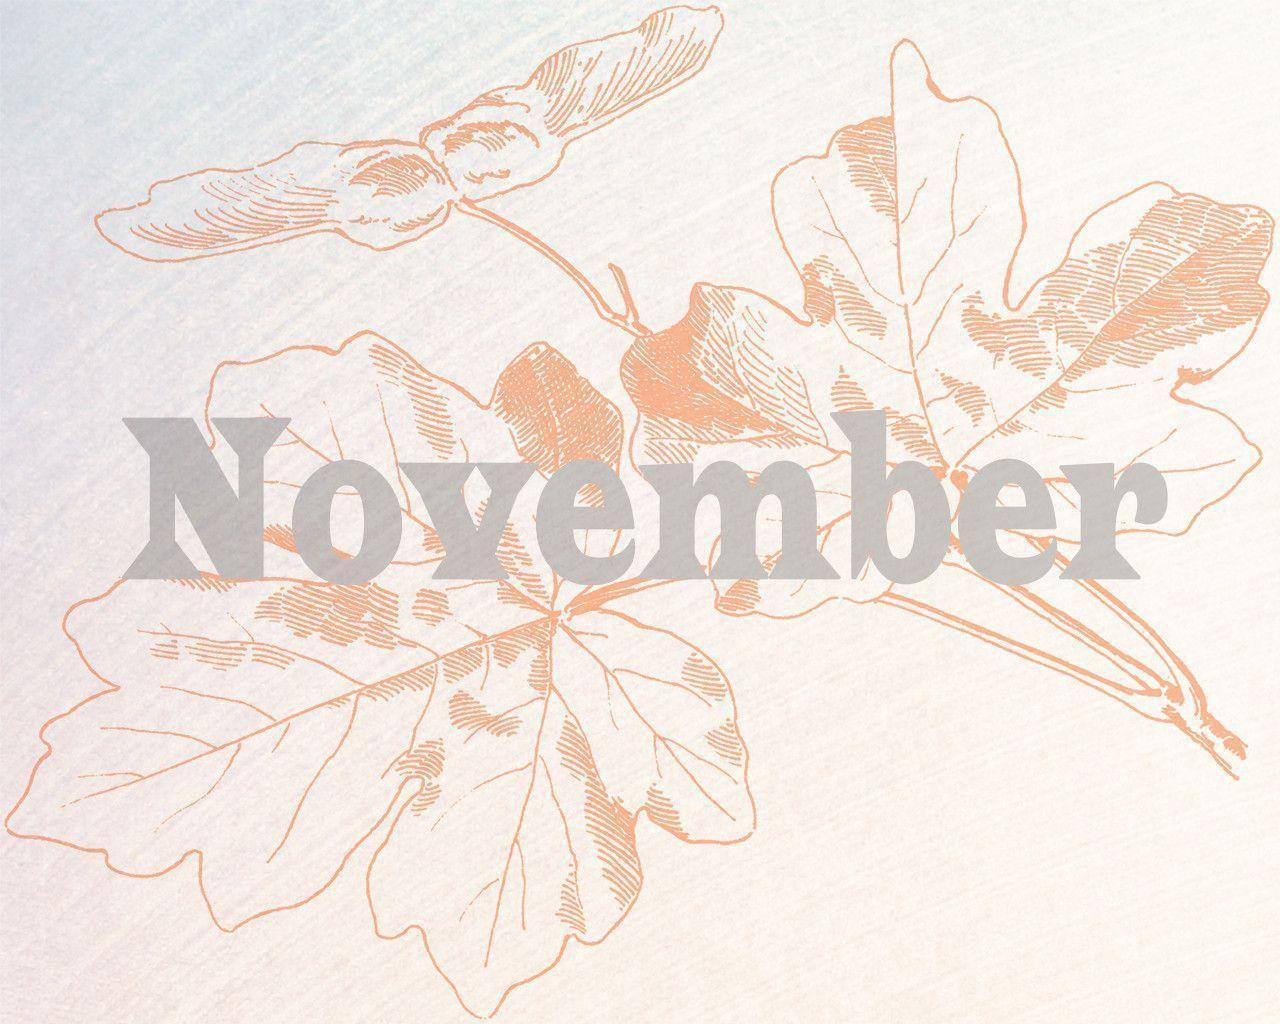 November Computer Wallpaper and Worth Seeing This Week